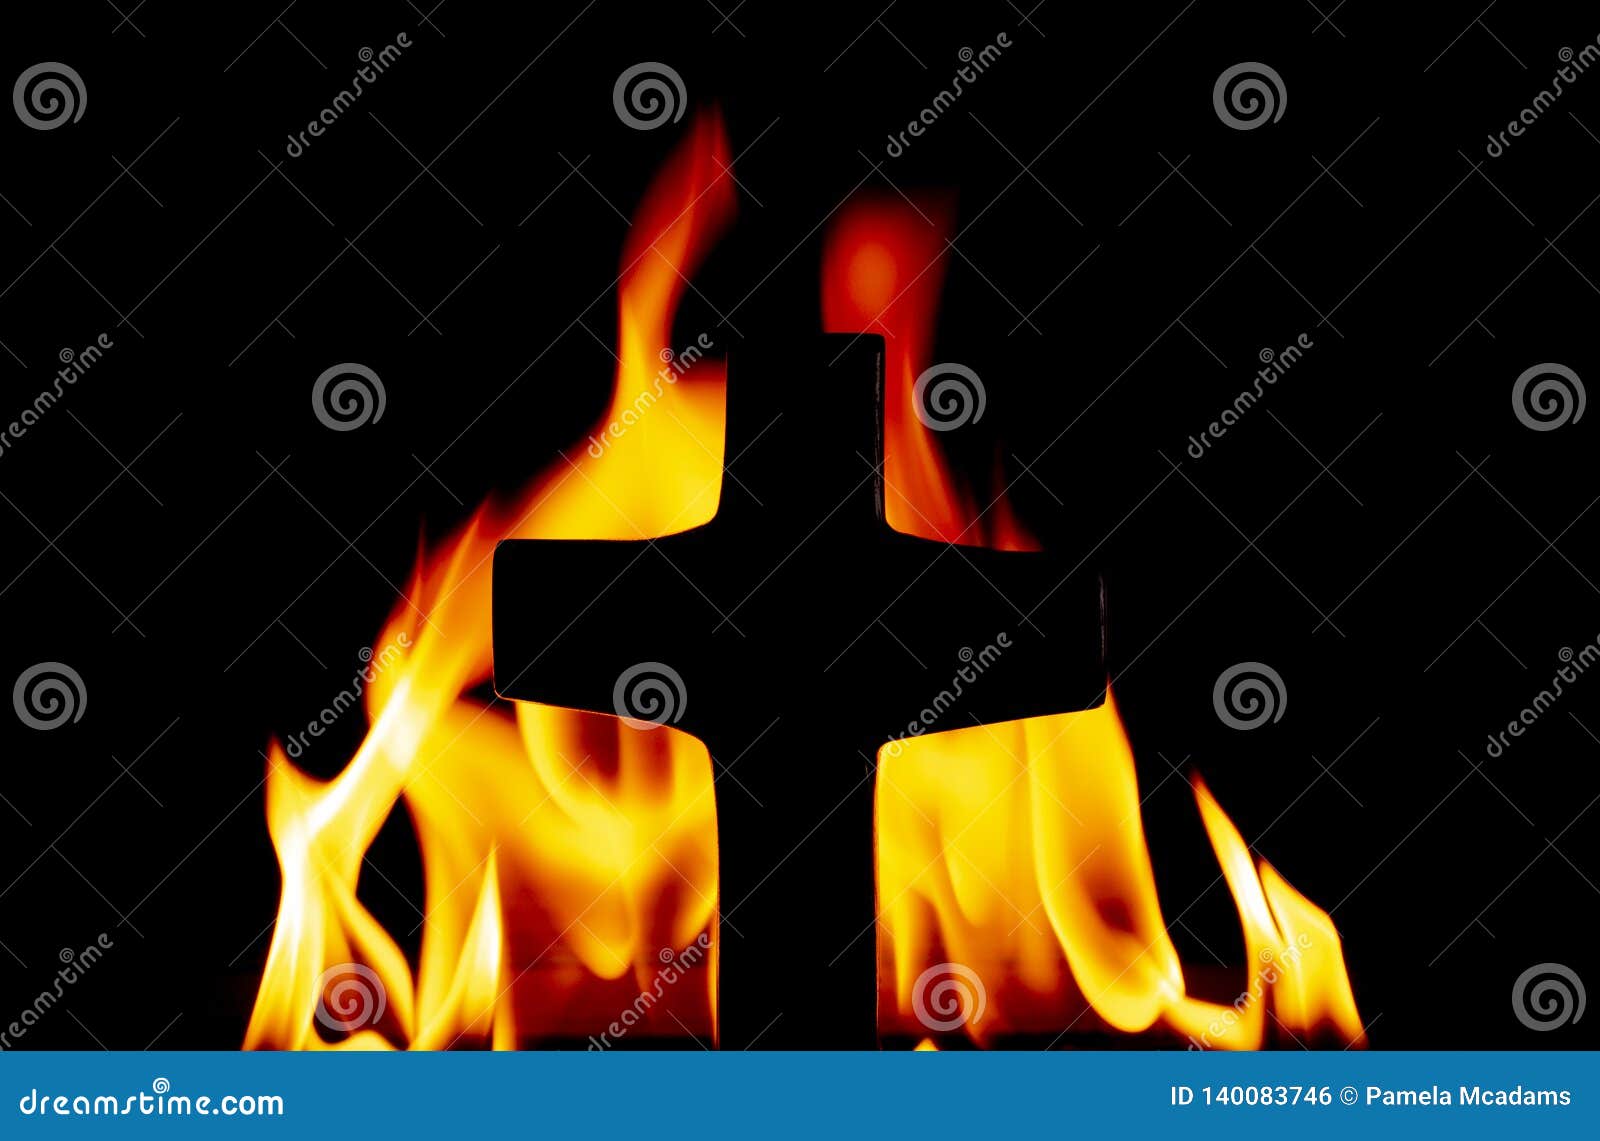 A Cross with Fire in the Background Stock Photo - Image of baptism ...